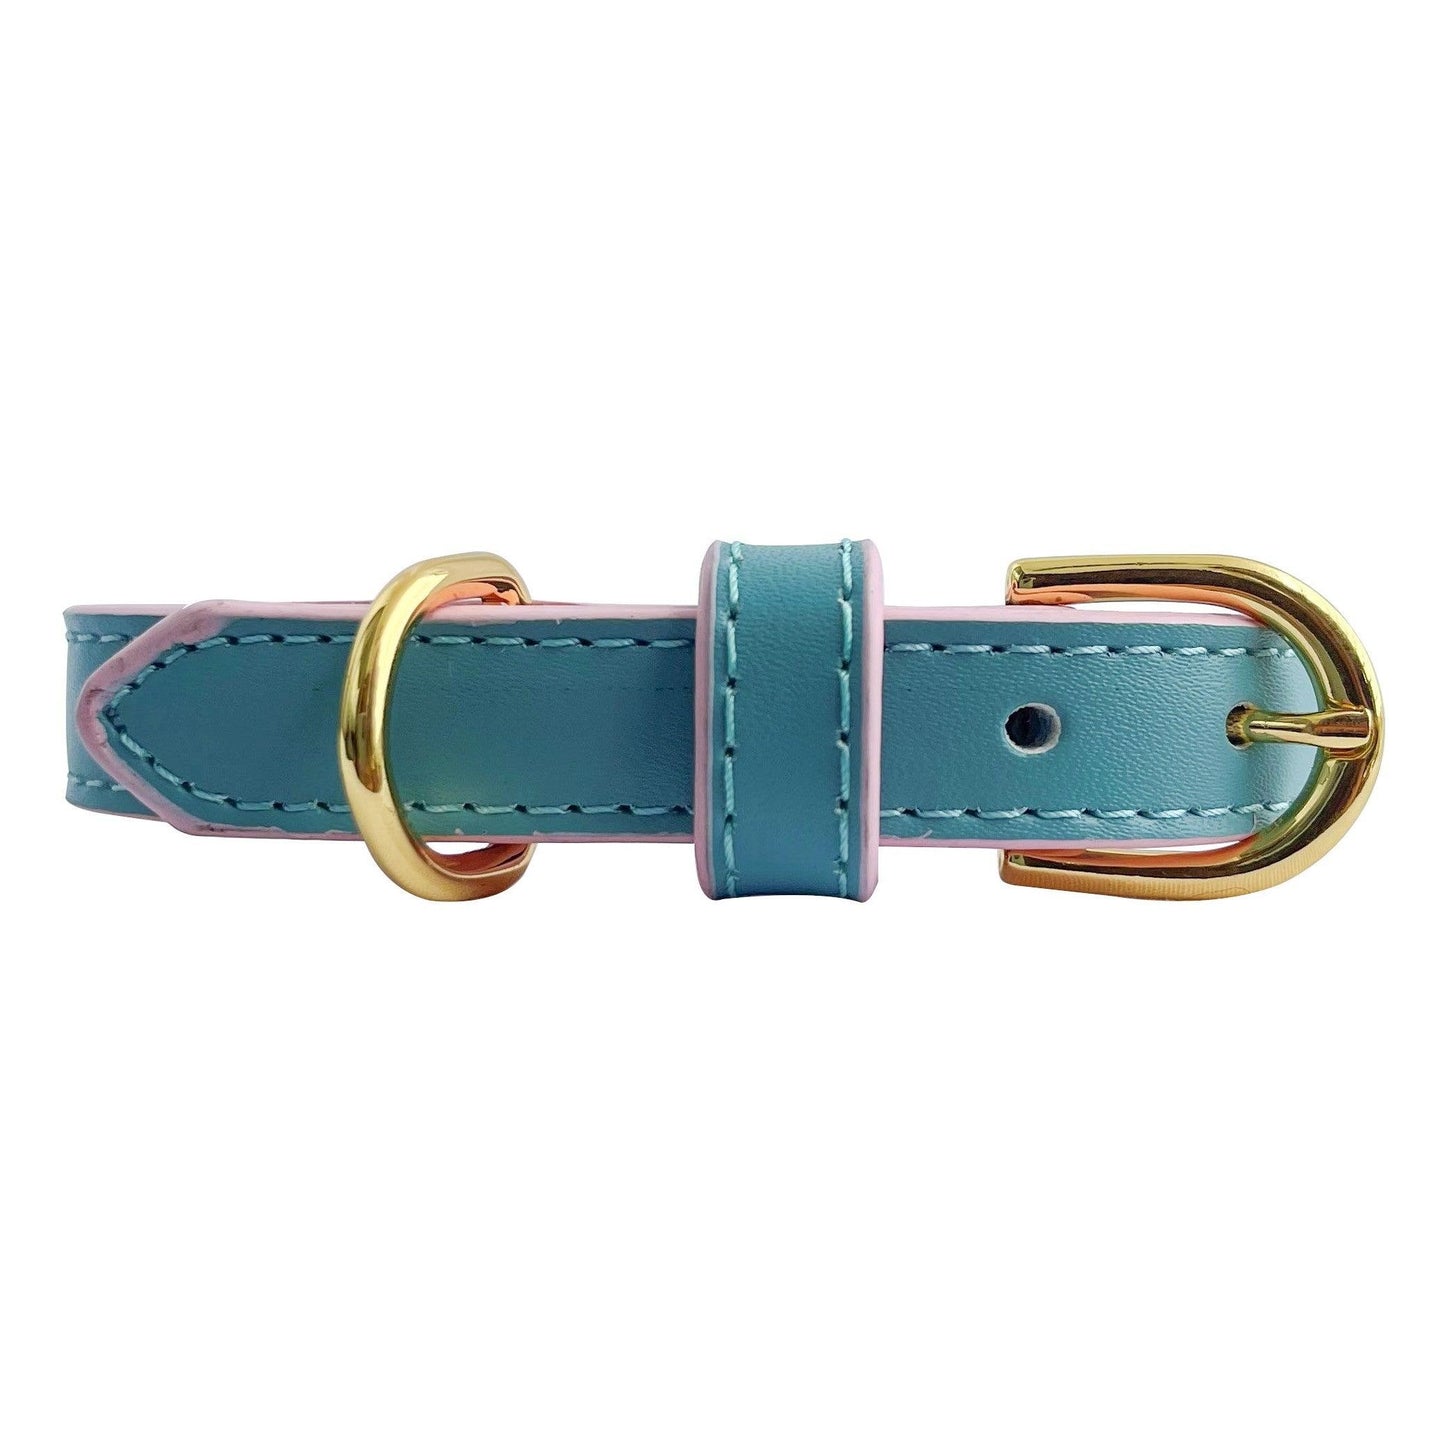 Anthea Dog Collar in Light Blue with Violet Trimmings